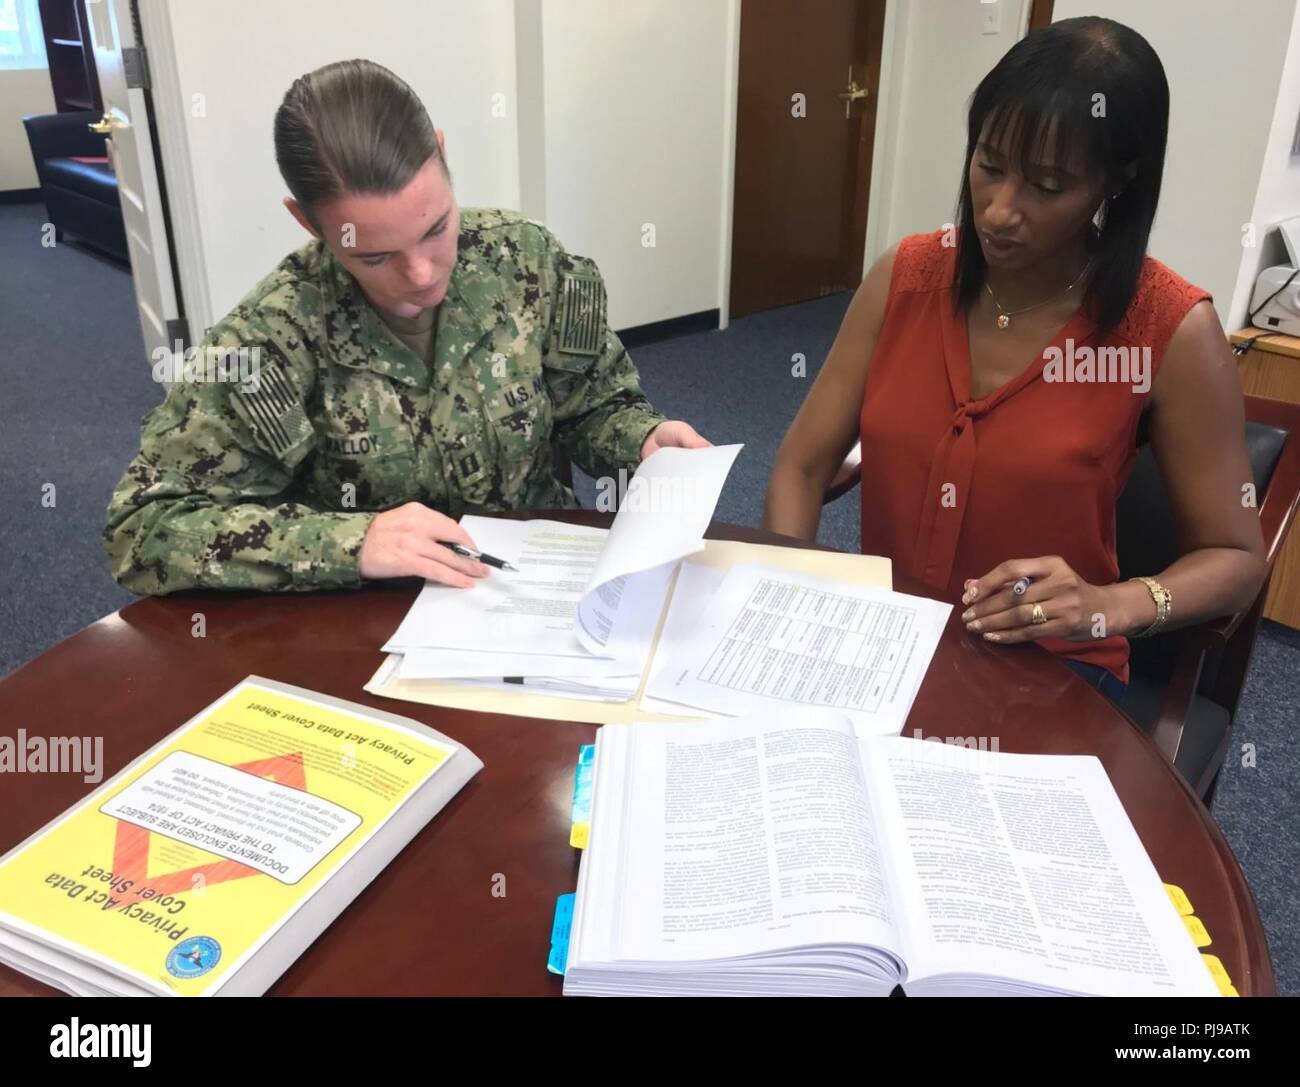 Fla. (July 12, 2018) The Center for Information Warfare Training's (CIWT) legal team, comprised of Lt. Alison Malloy (left) and Tammy Hawkins, is paramount to the daily operations of the successful training of thousands of information warfare professionals each year throughout the CIWT domain.  Both bring a broad range of legal talent, expertise and innovative thinking to help the CIWT domain operate in today’s increasingly complex legal and regulatory environments. Stock Photo